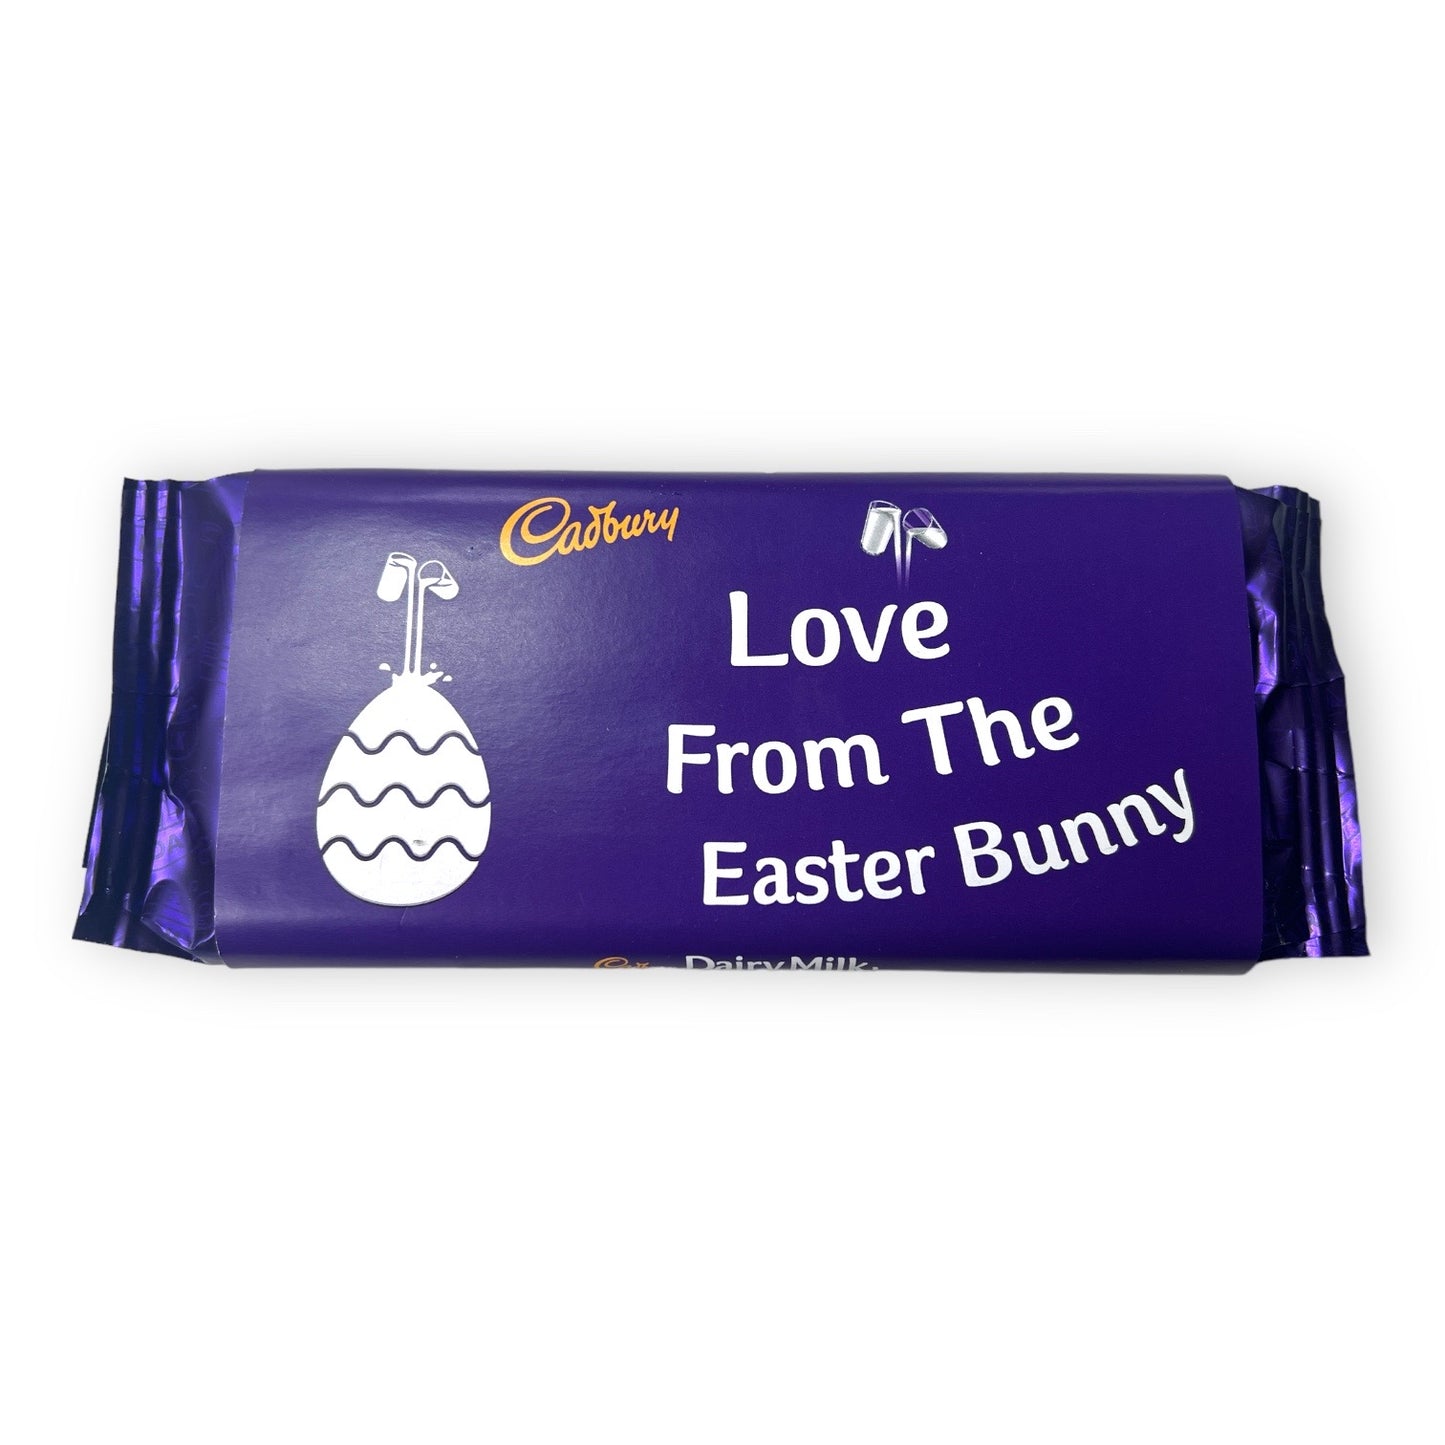 Love From The Easter Bunny - Cadbury Dairy Milk (Various Flavours)